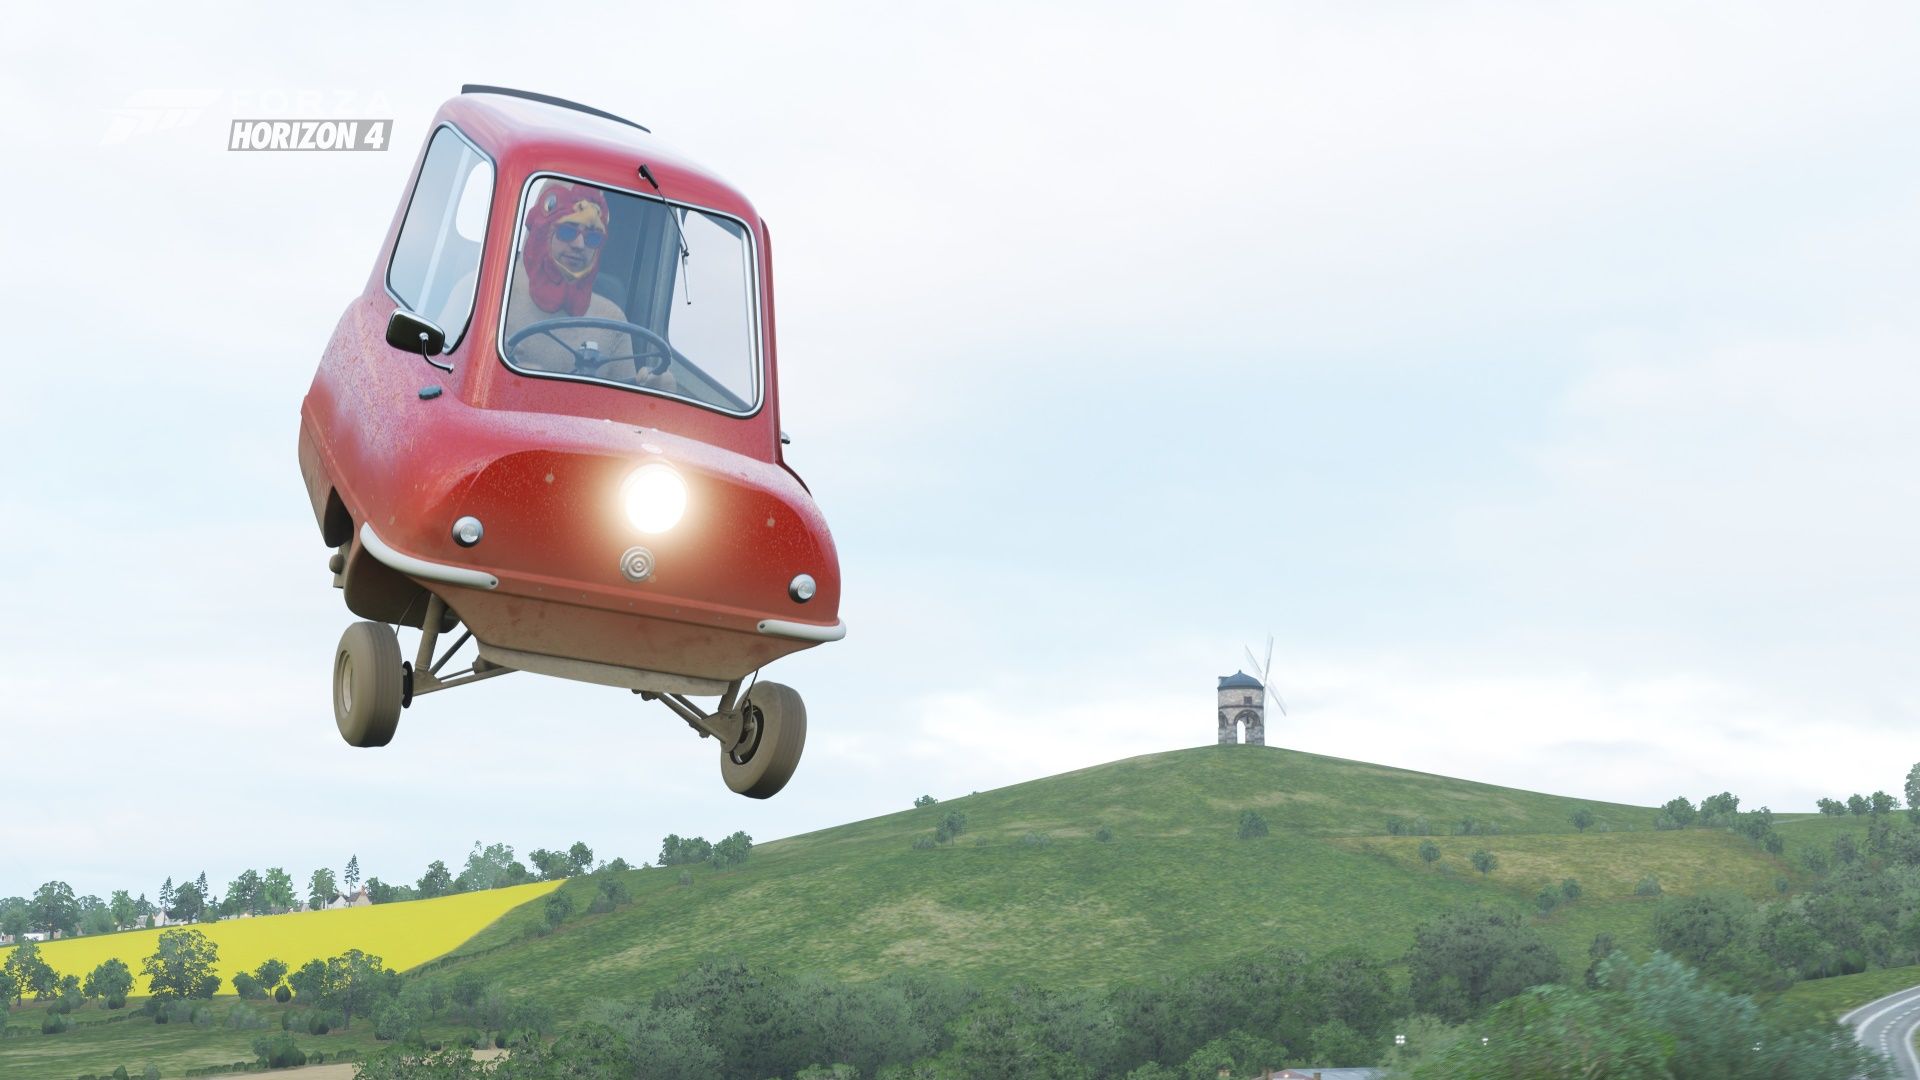 You may be cool, but you will never be Flying a Peel P50 in a